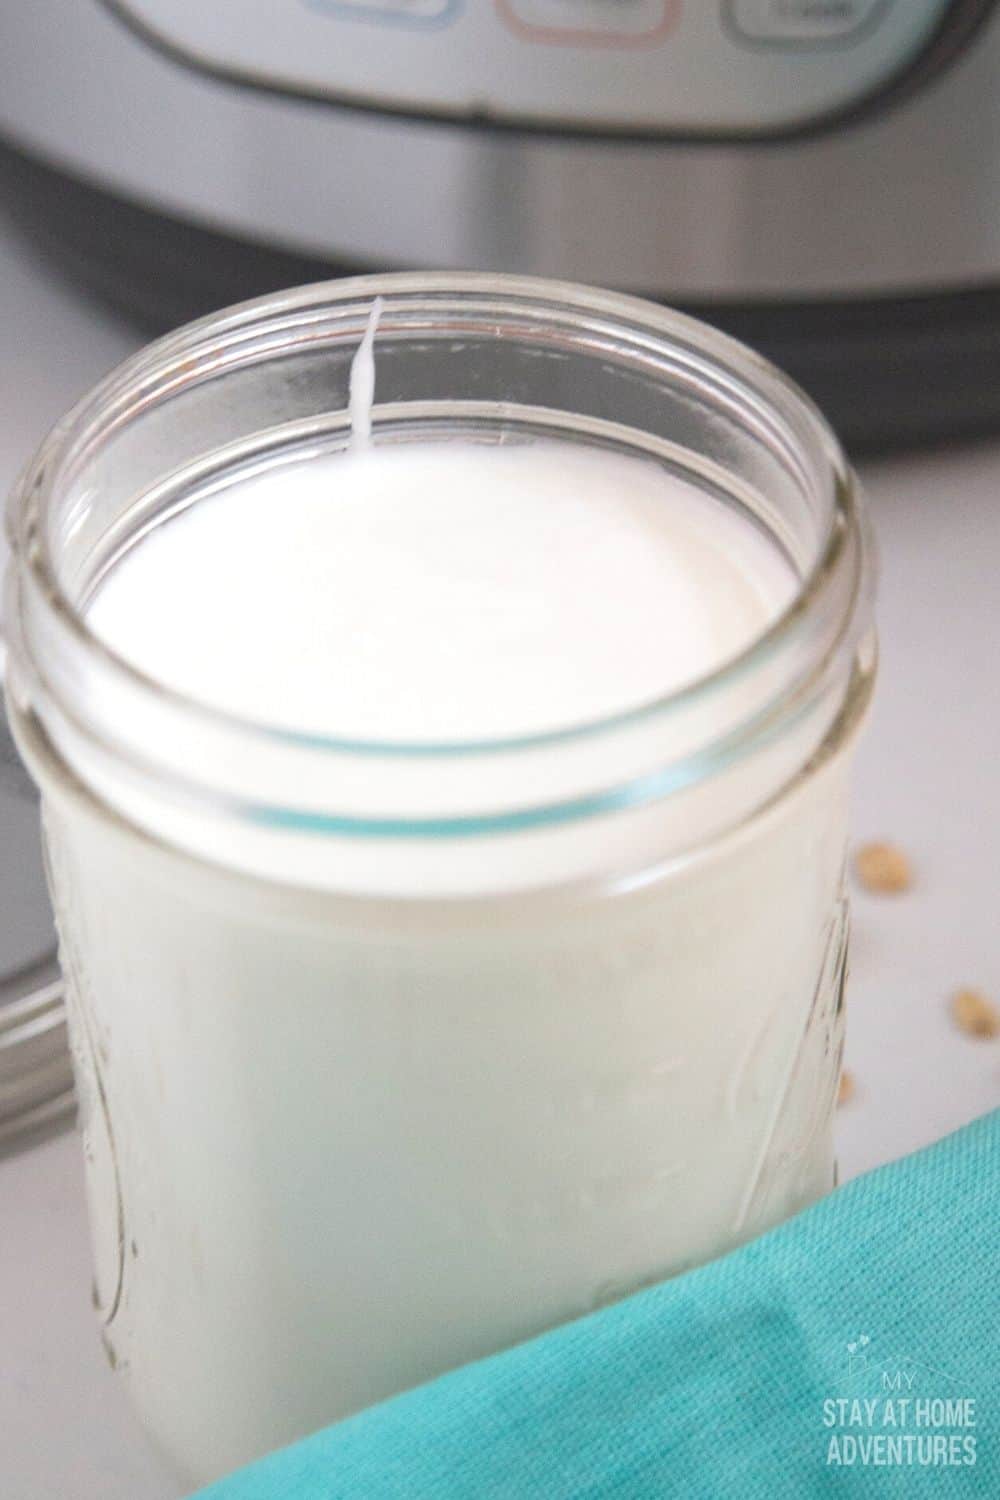 Want to try making vanilla yogurt using your Instant Pot? Learn everything you need about making yogurt using an electric pressure cooker. via @mystayathome